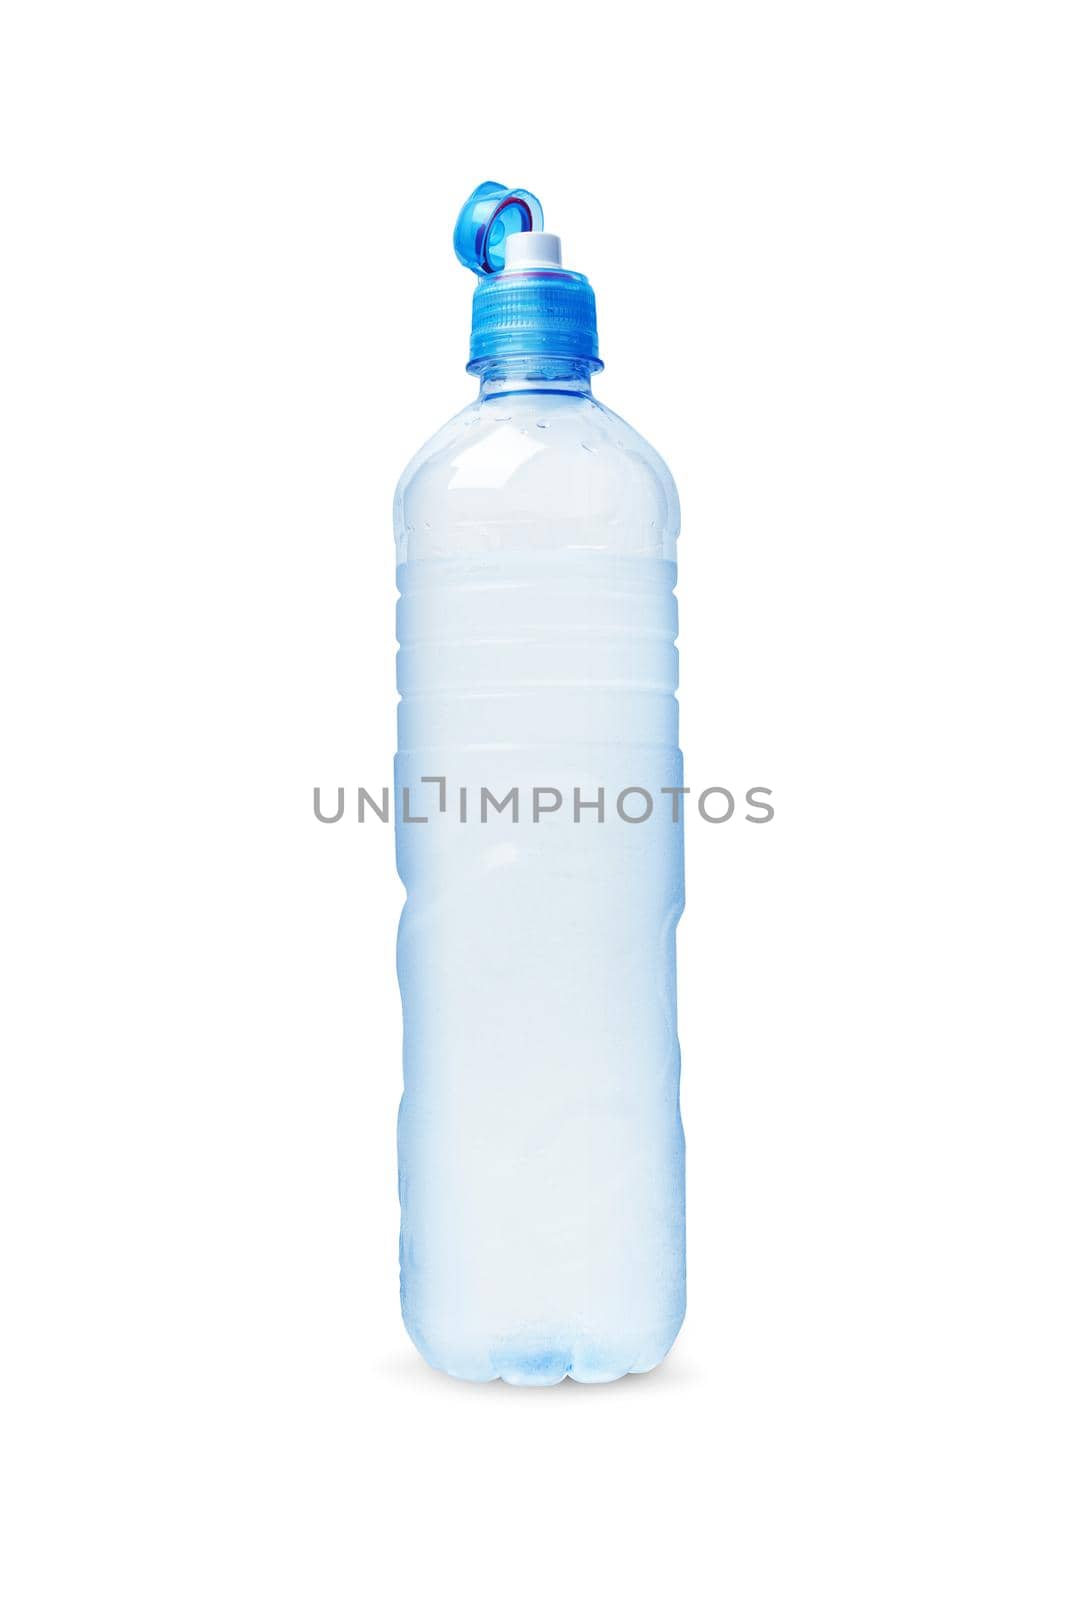 Plastic bottle of drinking water open cap. Isolated on white background by SlayCer